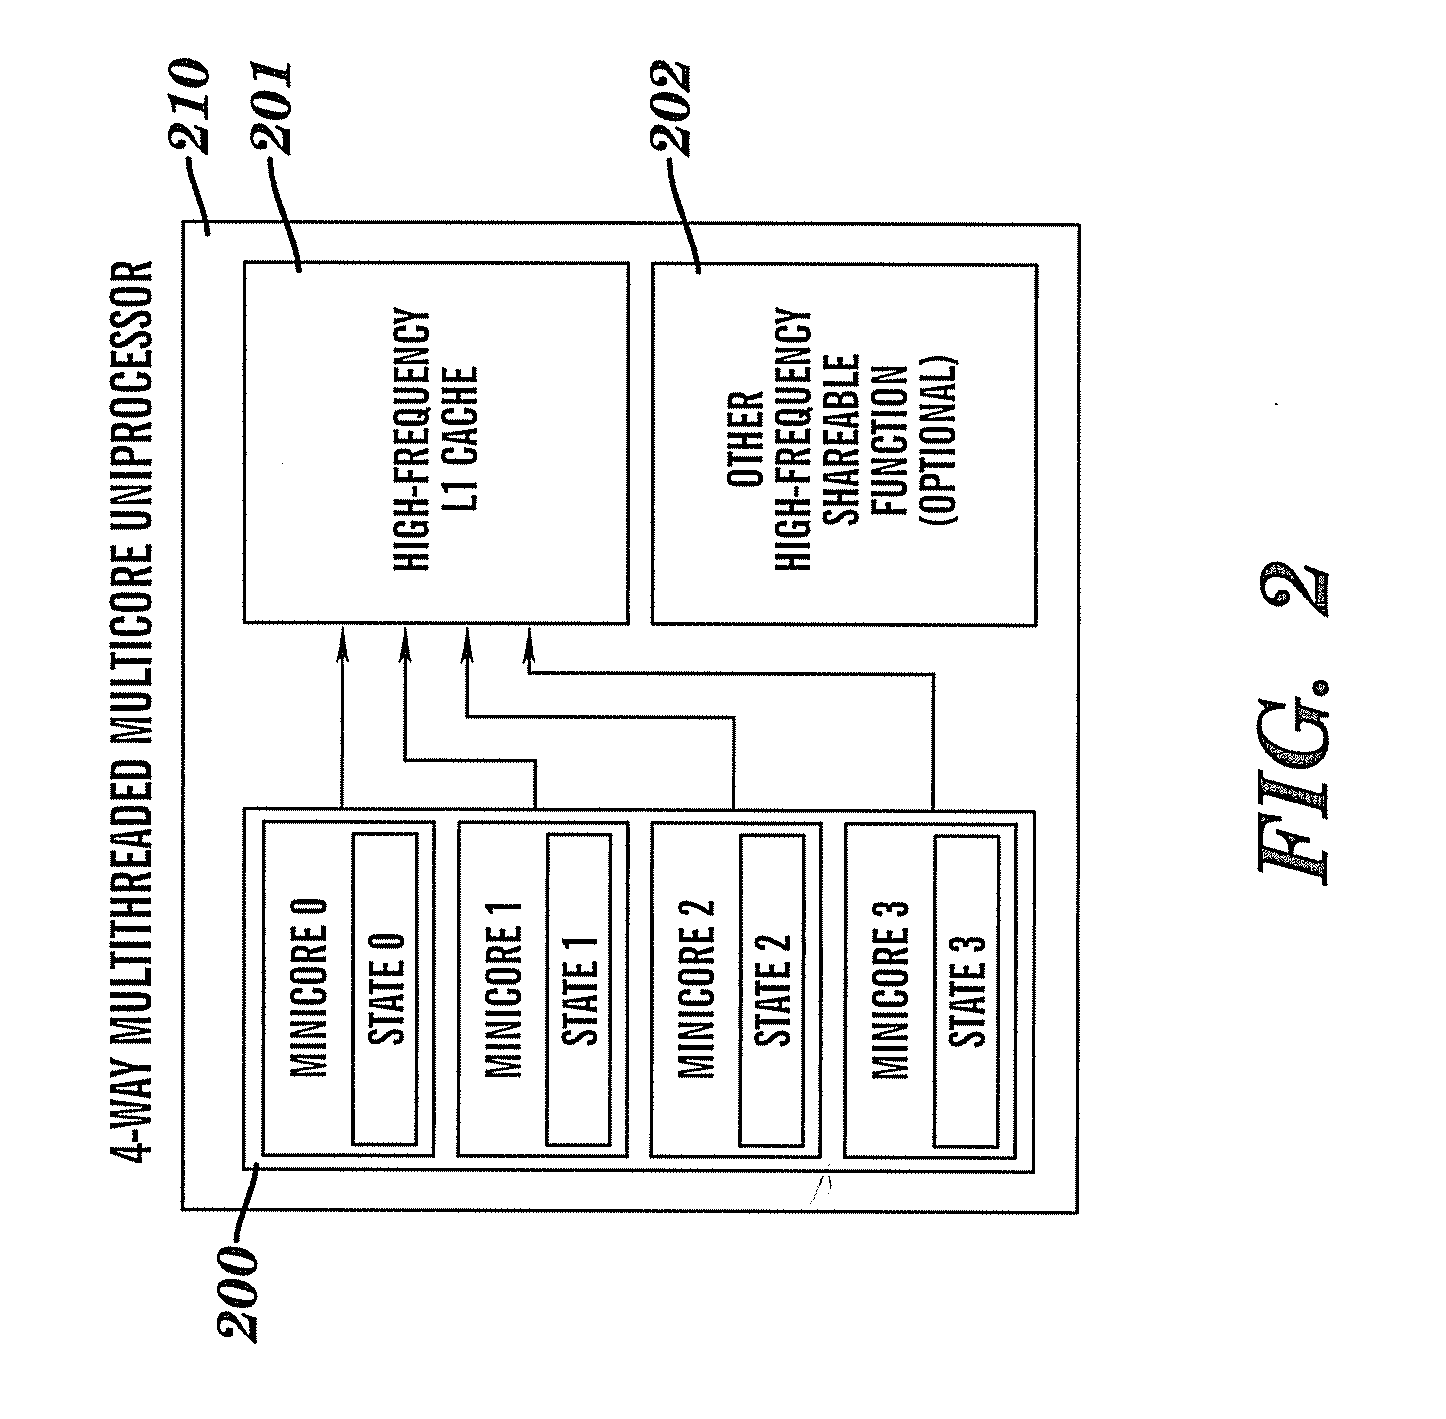 Multithreaded multicore uniprocessor and a heterogeneous multiprocessor incorporating the same